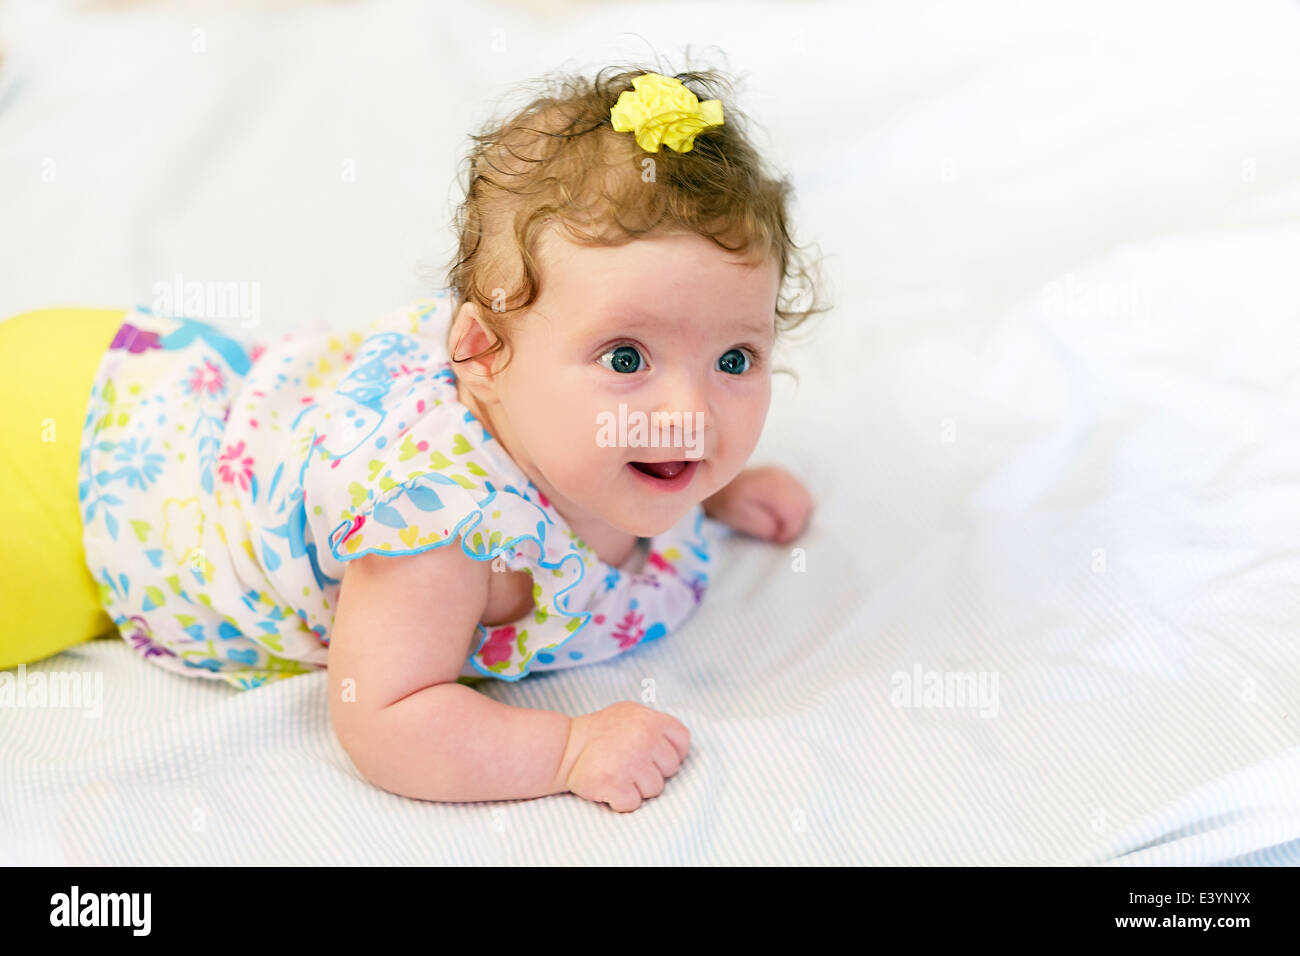 A three month old Caucasian infant girl lying on her stomach and smiling. Yellow clothing and white blanket. Closeup. Stock Photo